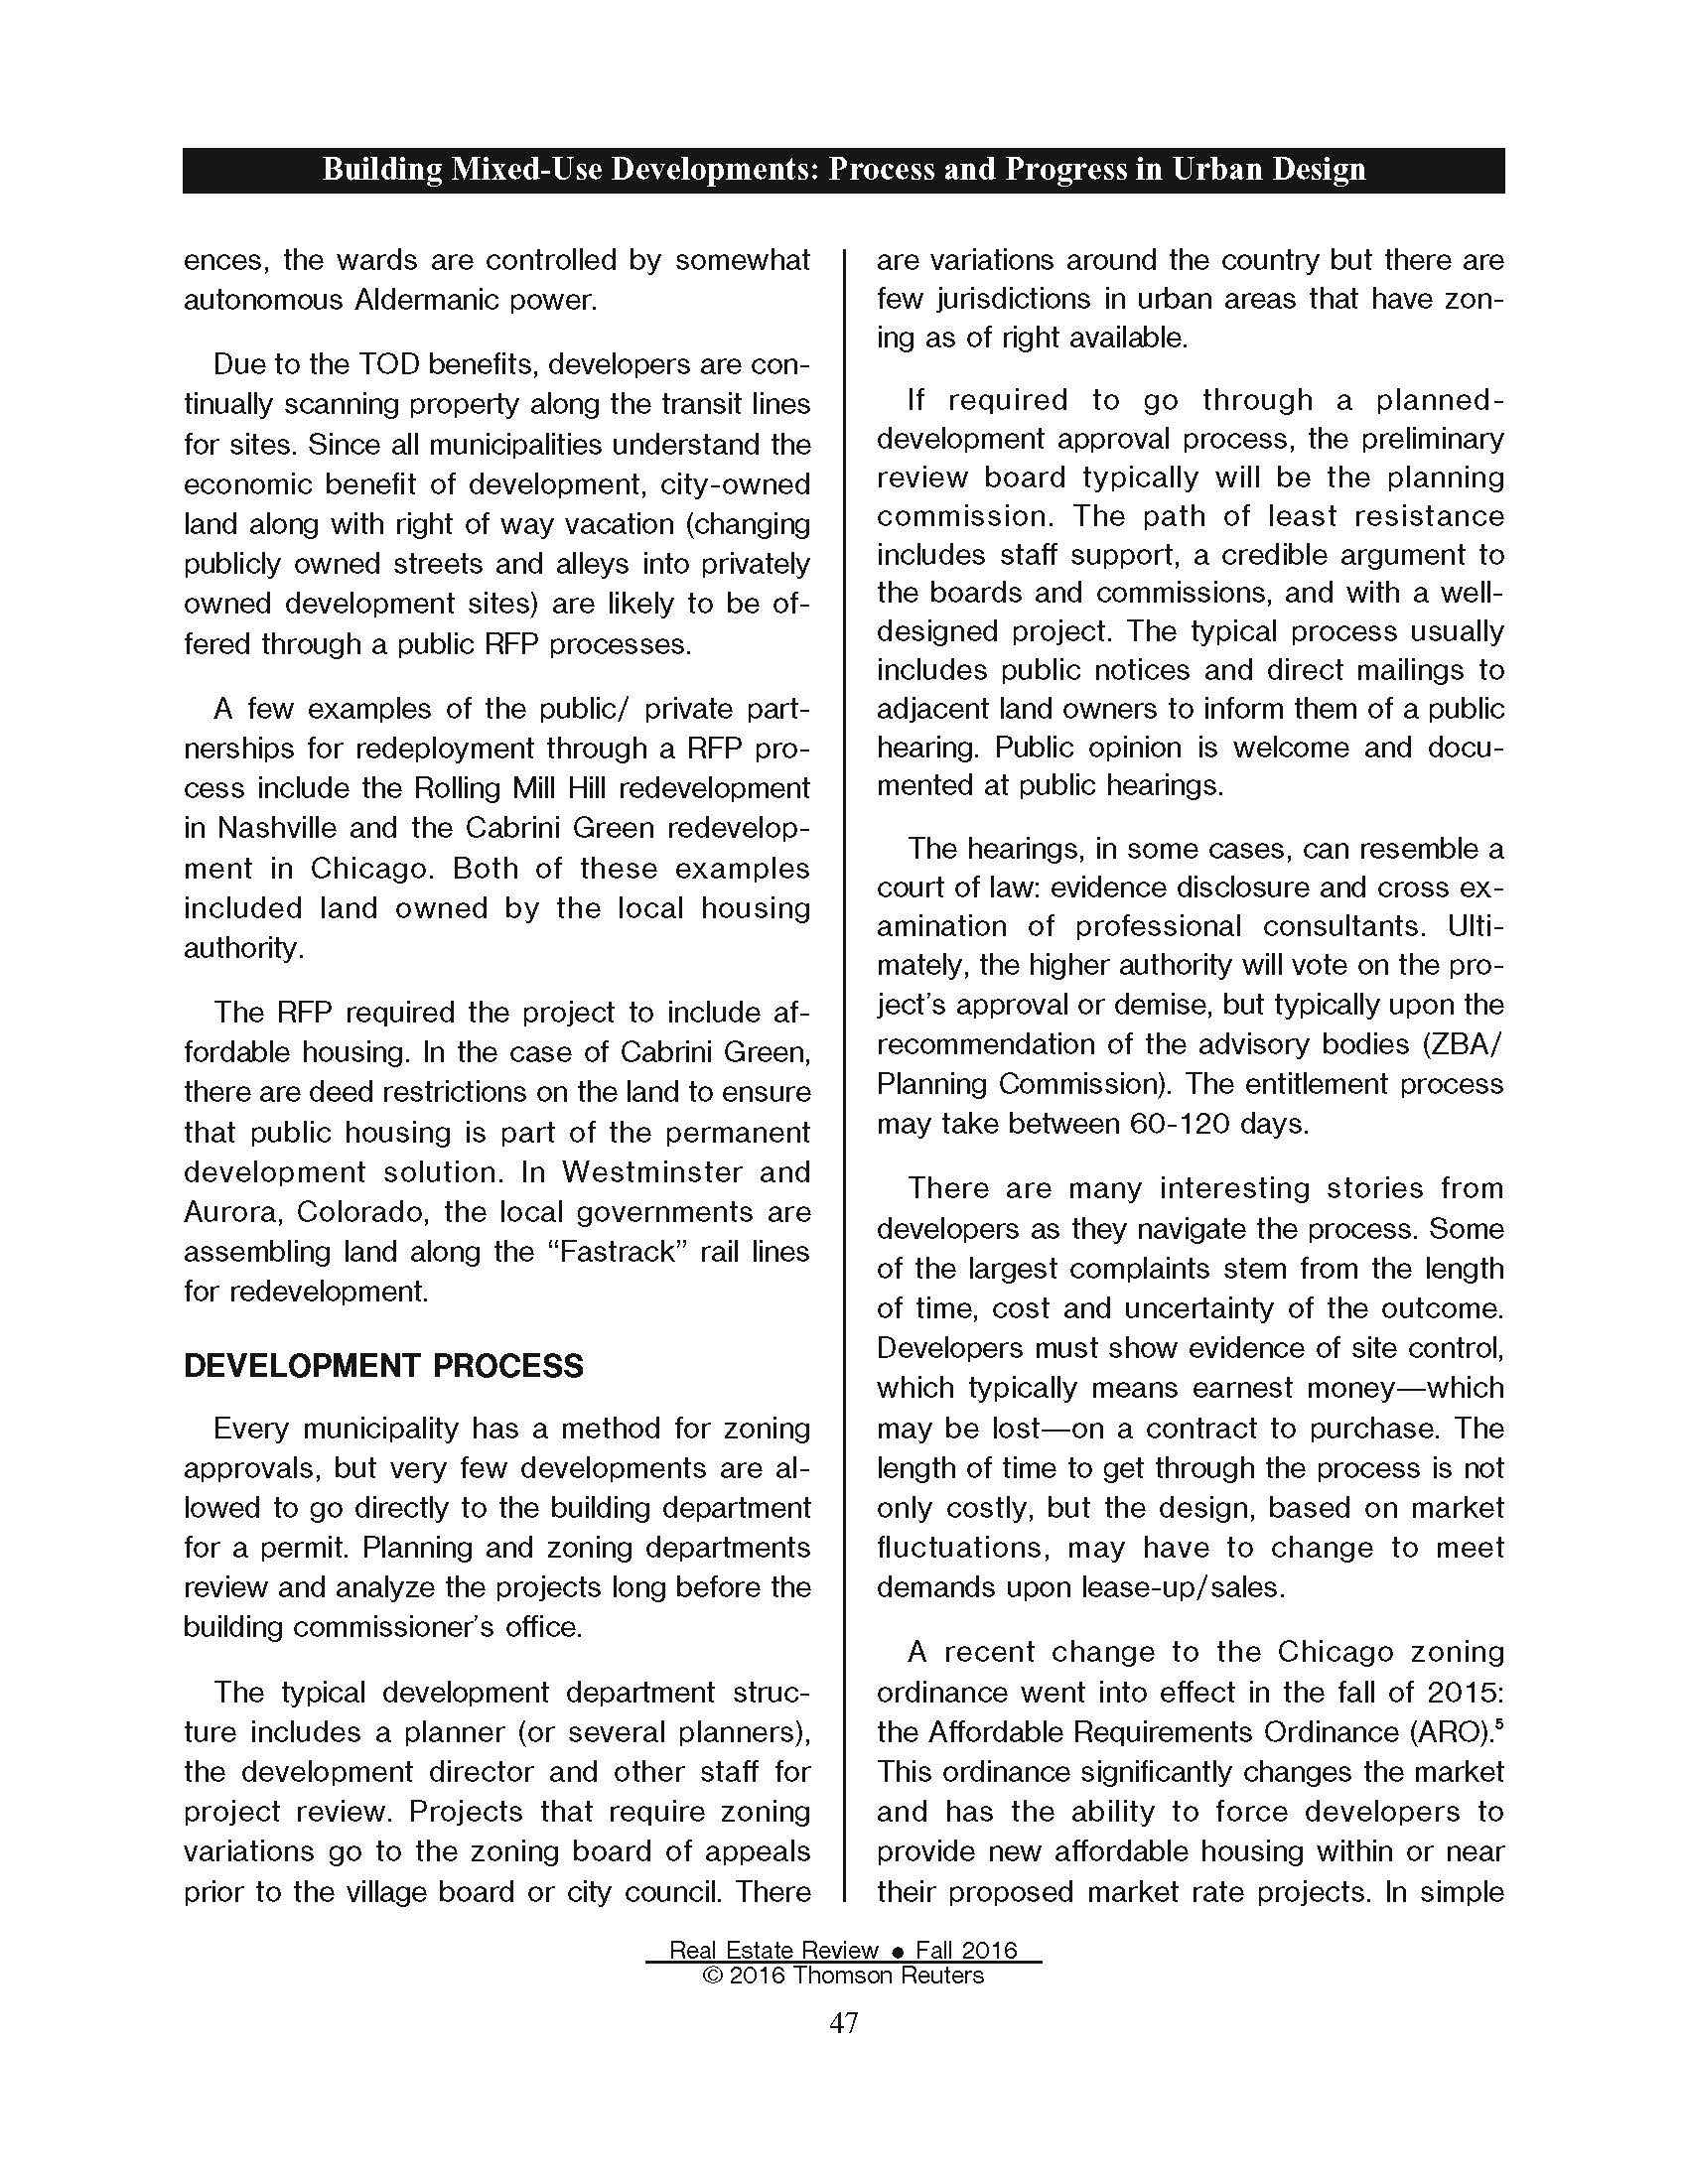 Real Estate Review (Building Mixed-Use Developments Process and Progress in Urban Design) 0916_Page_13